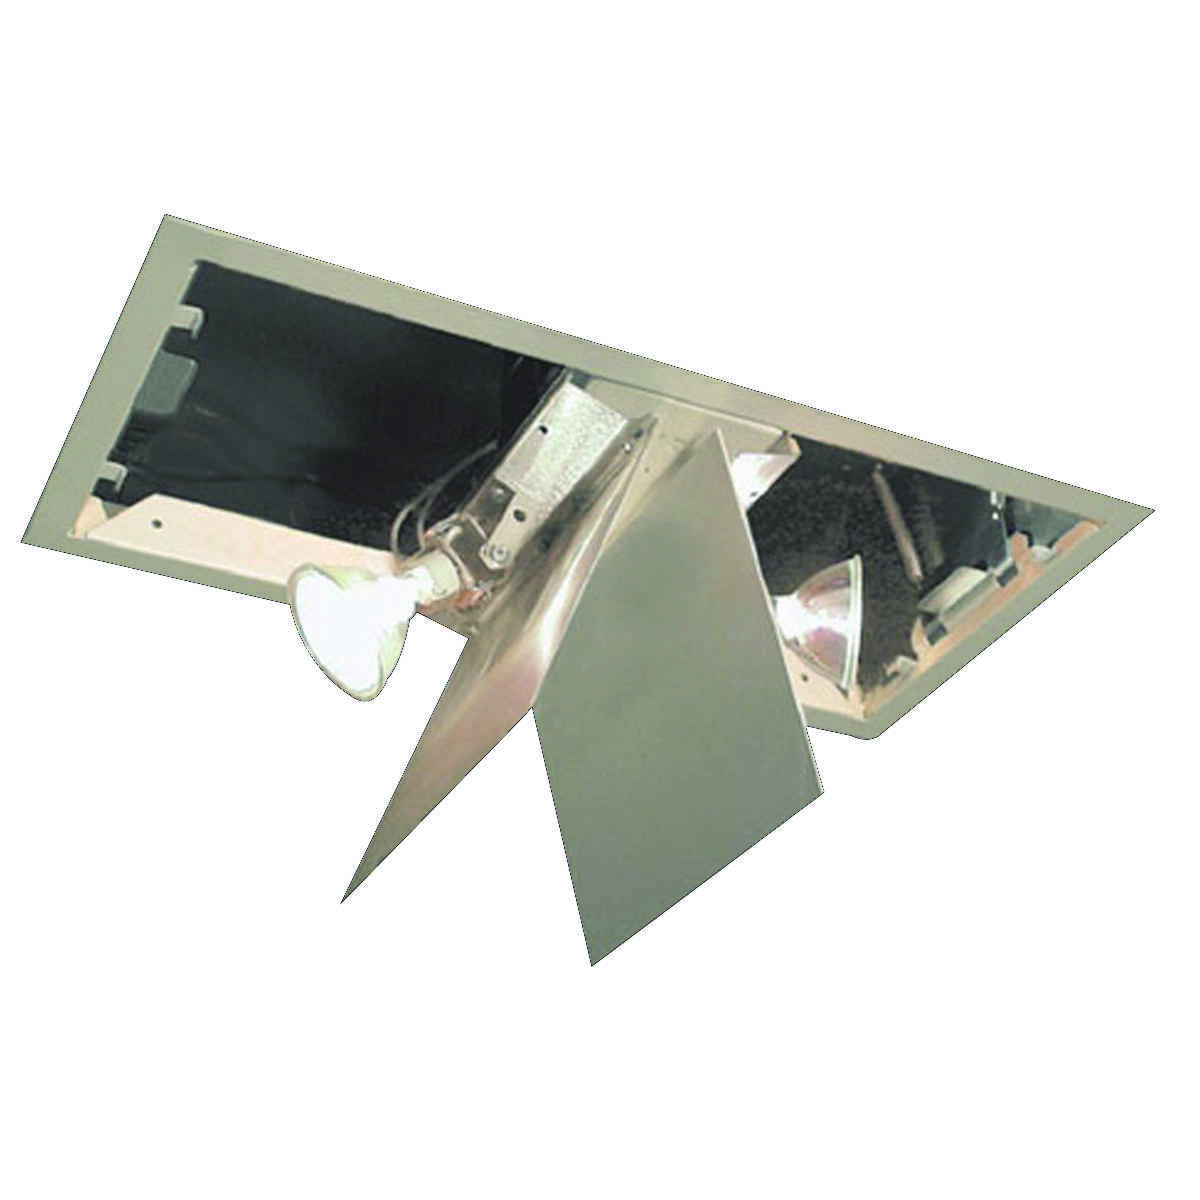 Details about   Hubbell DUAL-LITE LED LZ Series Emergency Lighting Unit LZ30I 